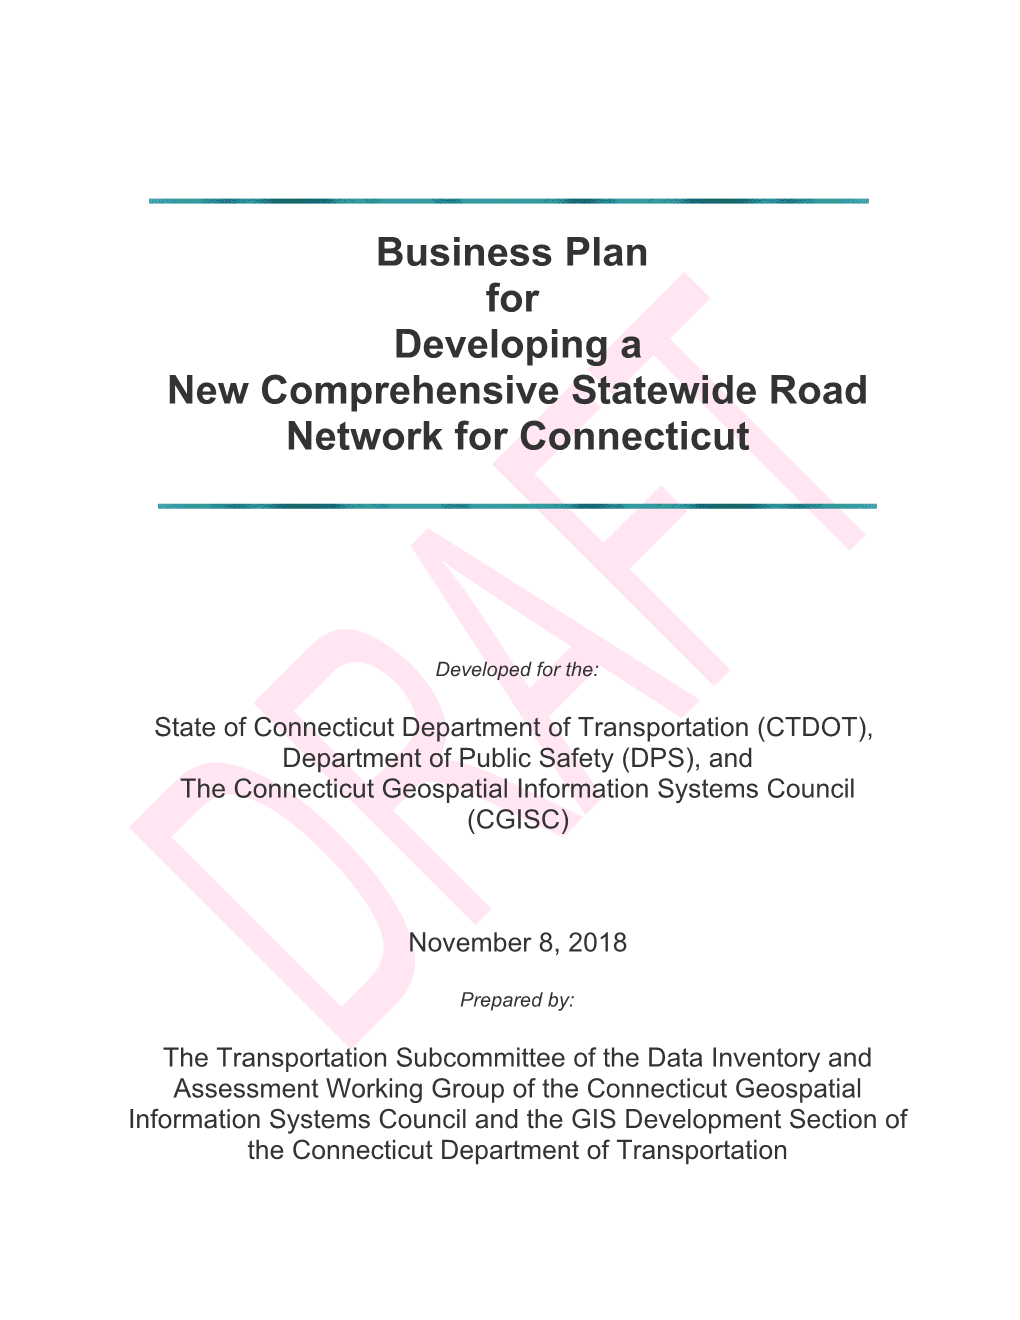 New Comprehensive Statewide Road Networkfor Connecticut